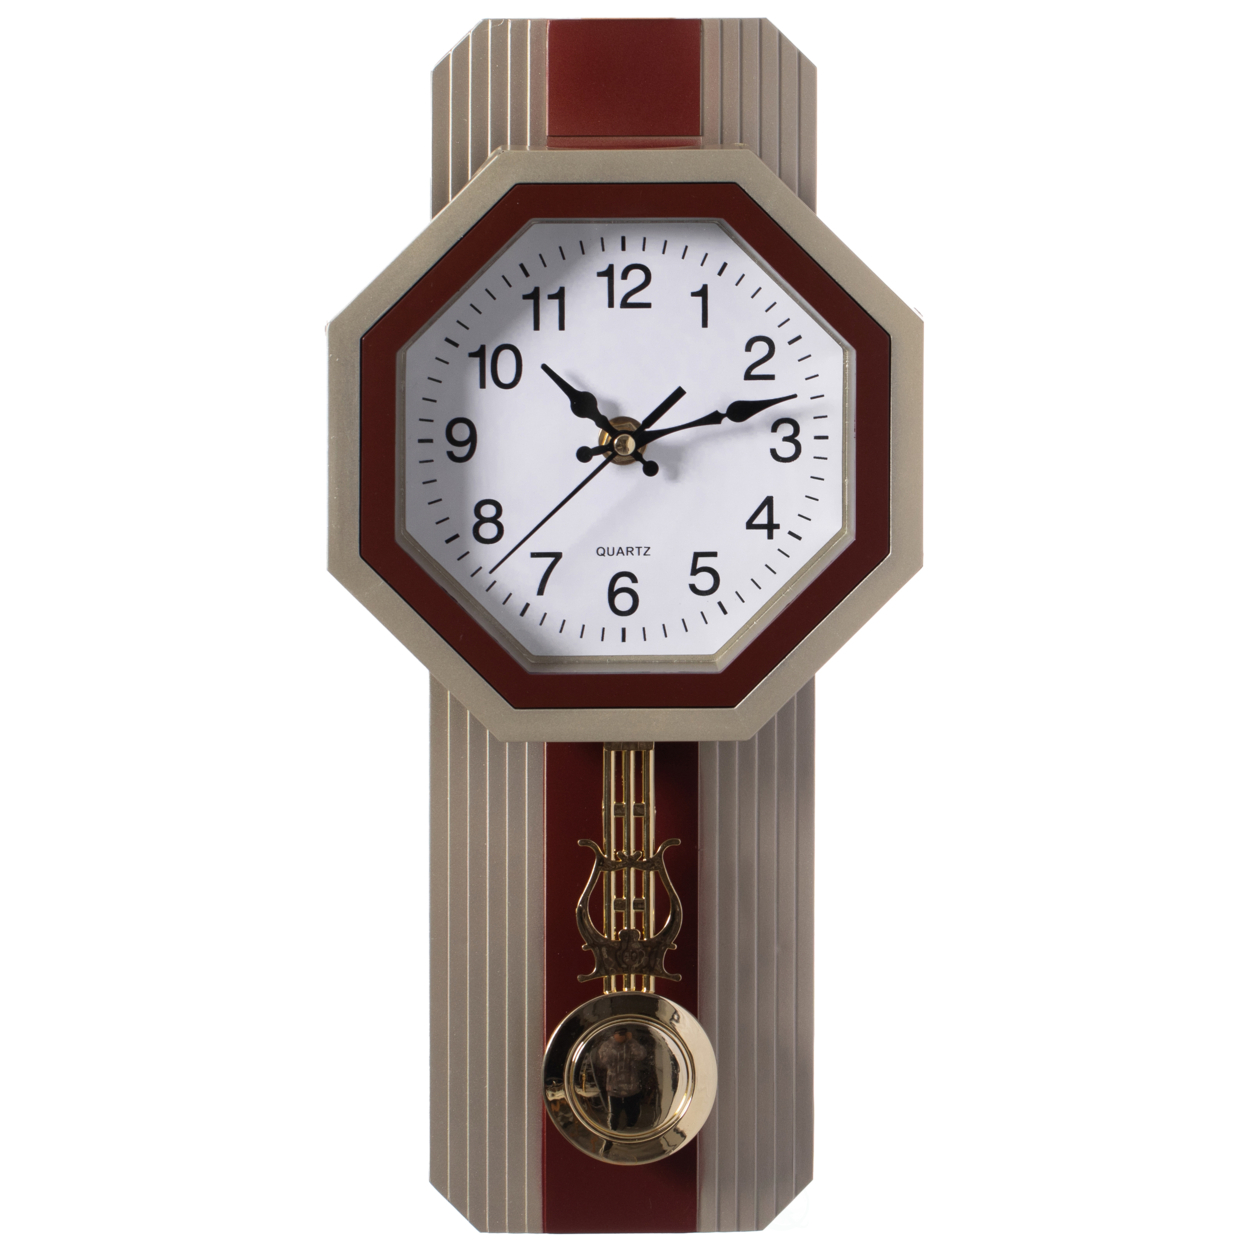 Traditional Round Wood- Looking Pendulum Plastic Wall Clock For Living Room, Kitchen, Or Dining Room - Beige